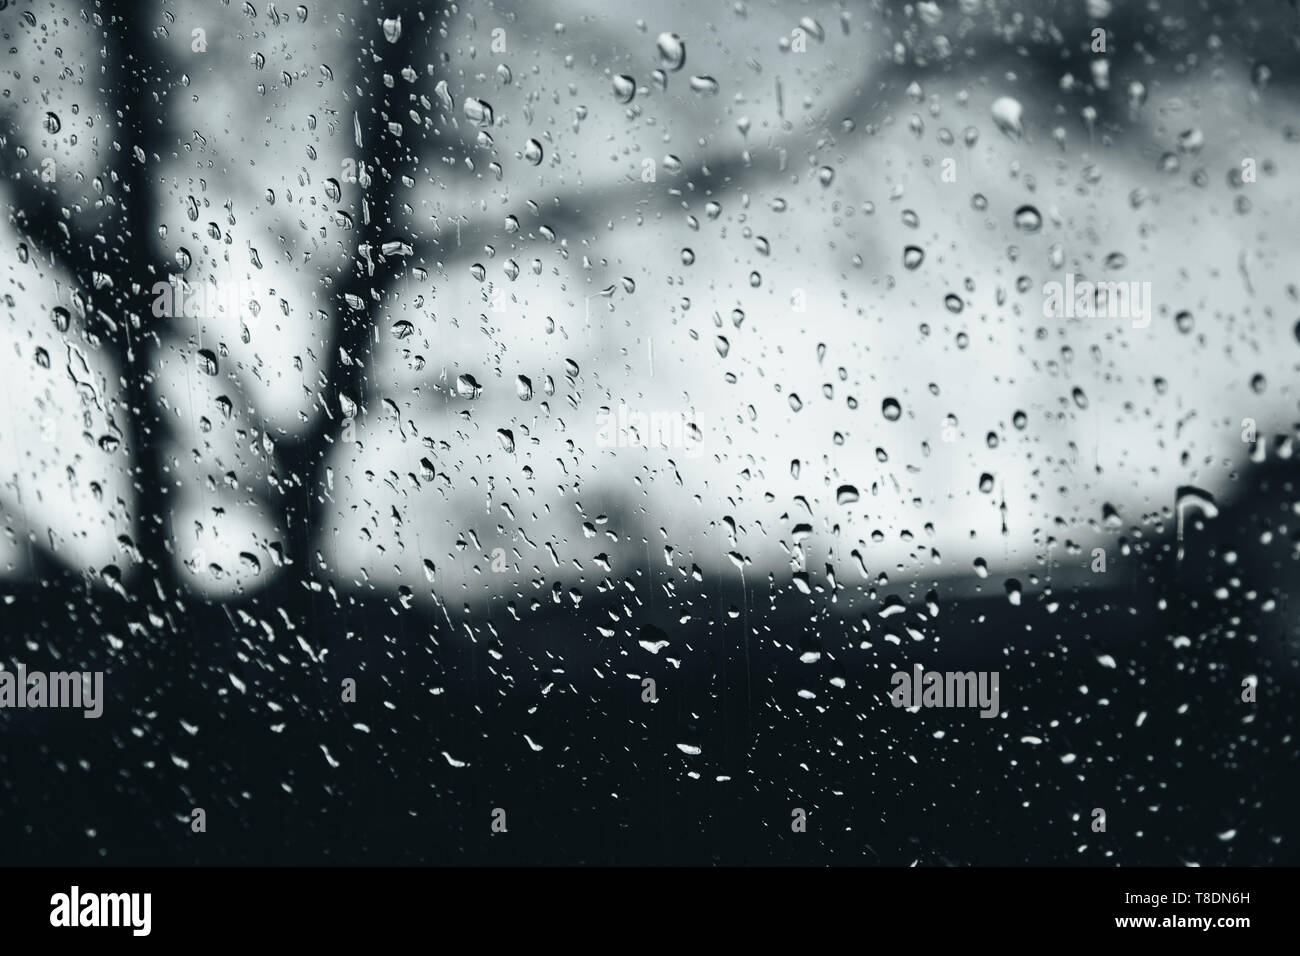 Closeup of rain droplets on glass window, water droplets with light reflection and refraction, blurred dark autumn landscape, black and white abstract Stock Photo